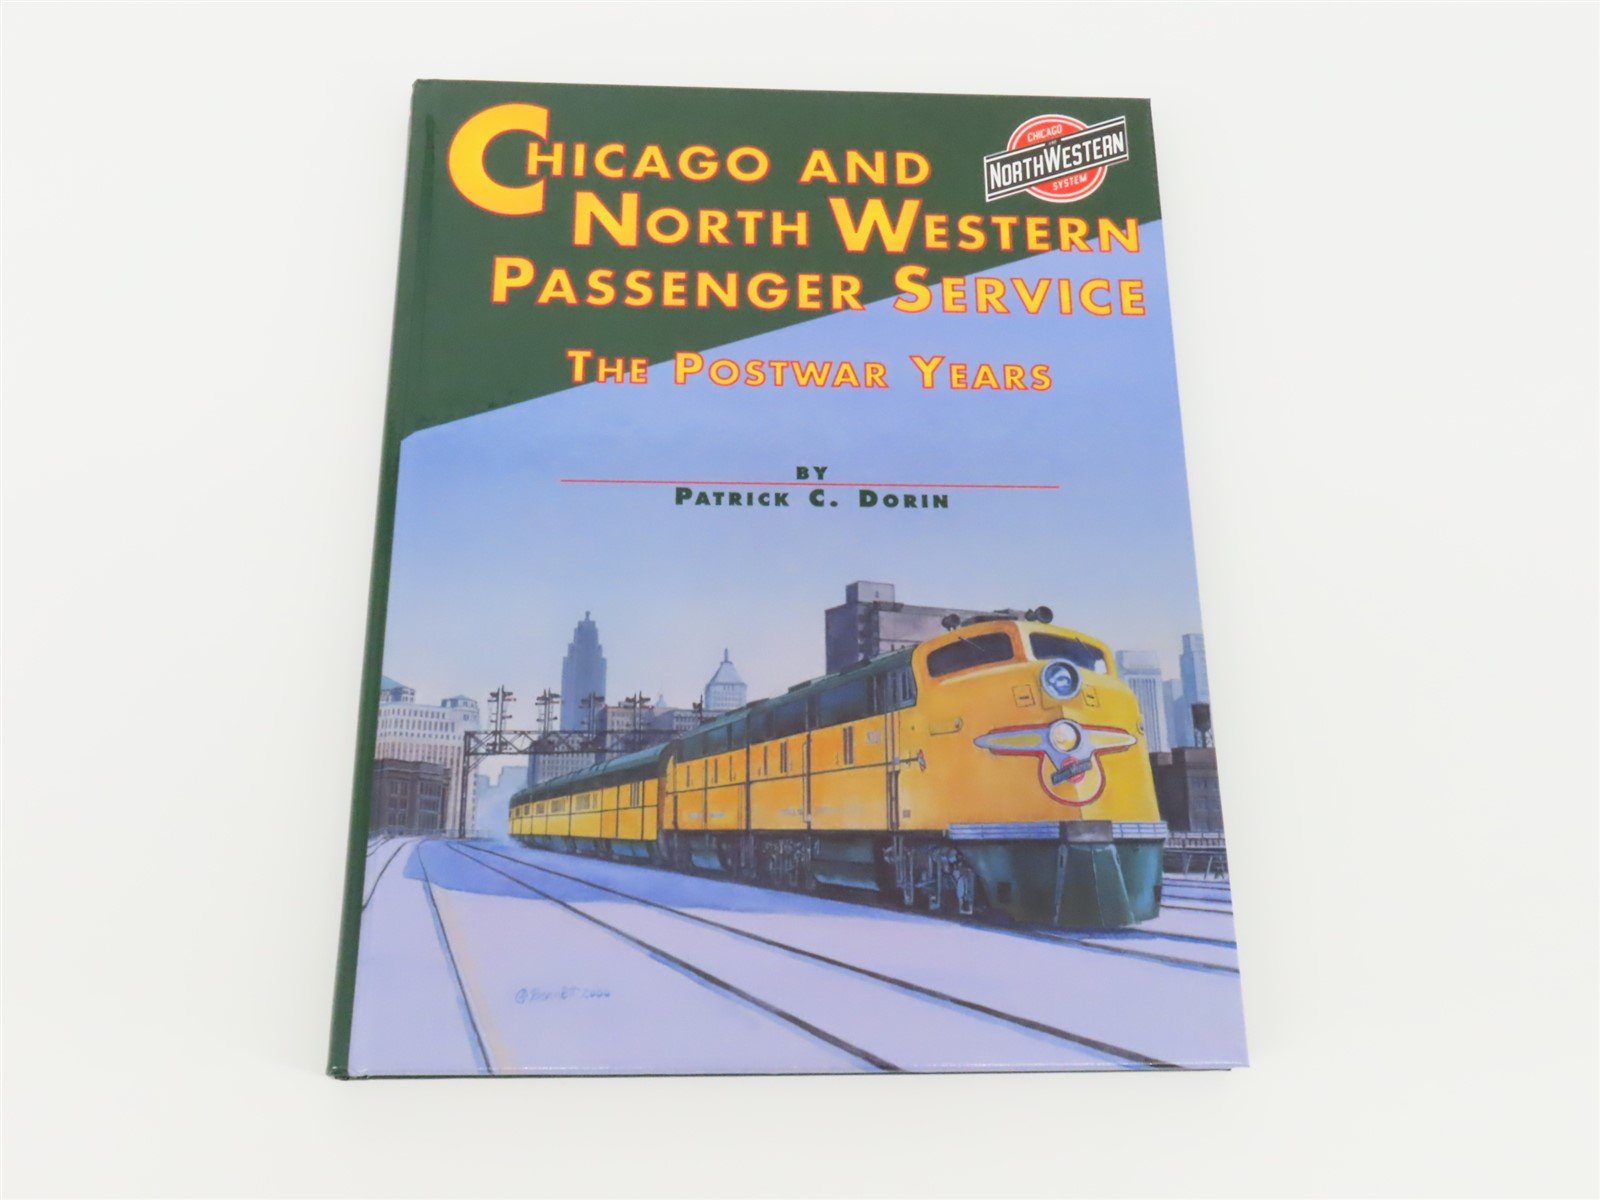 Chicago And North Western Passenger Service - The Postwar Years by Dorin ©2000